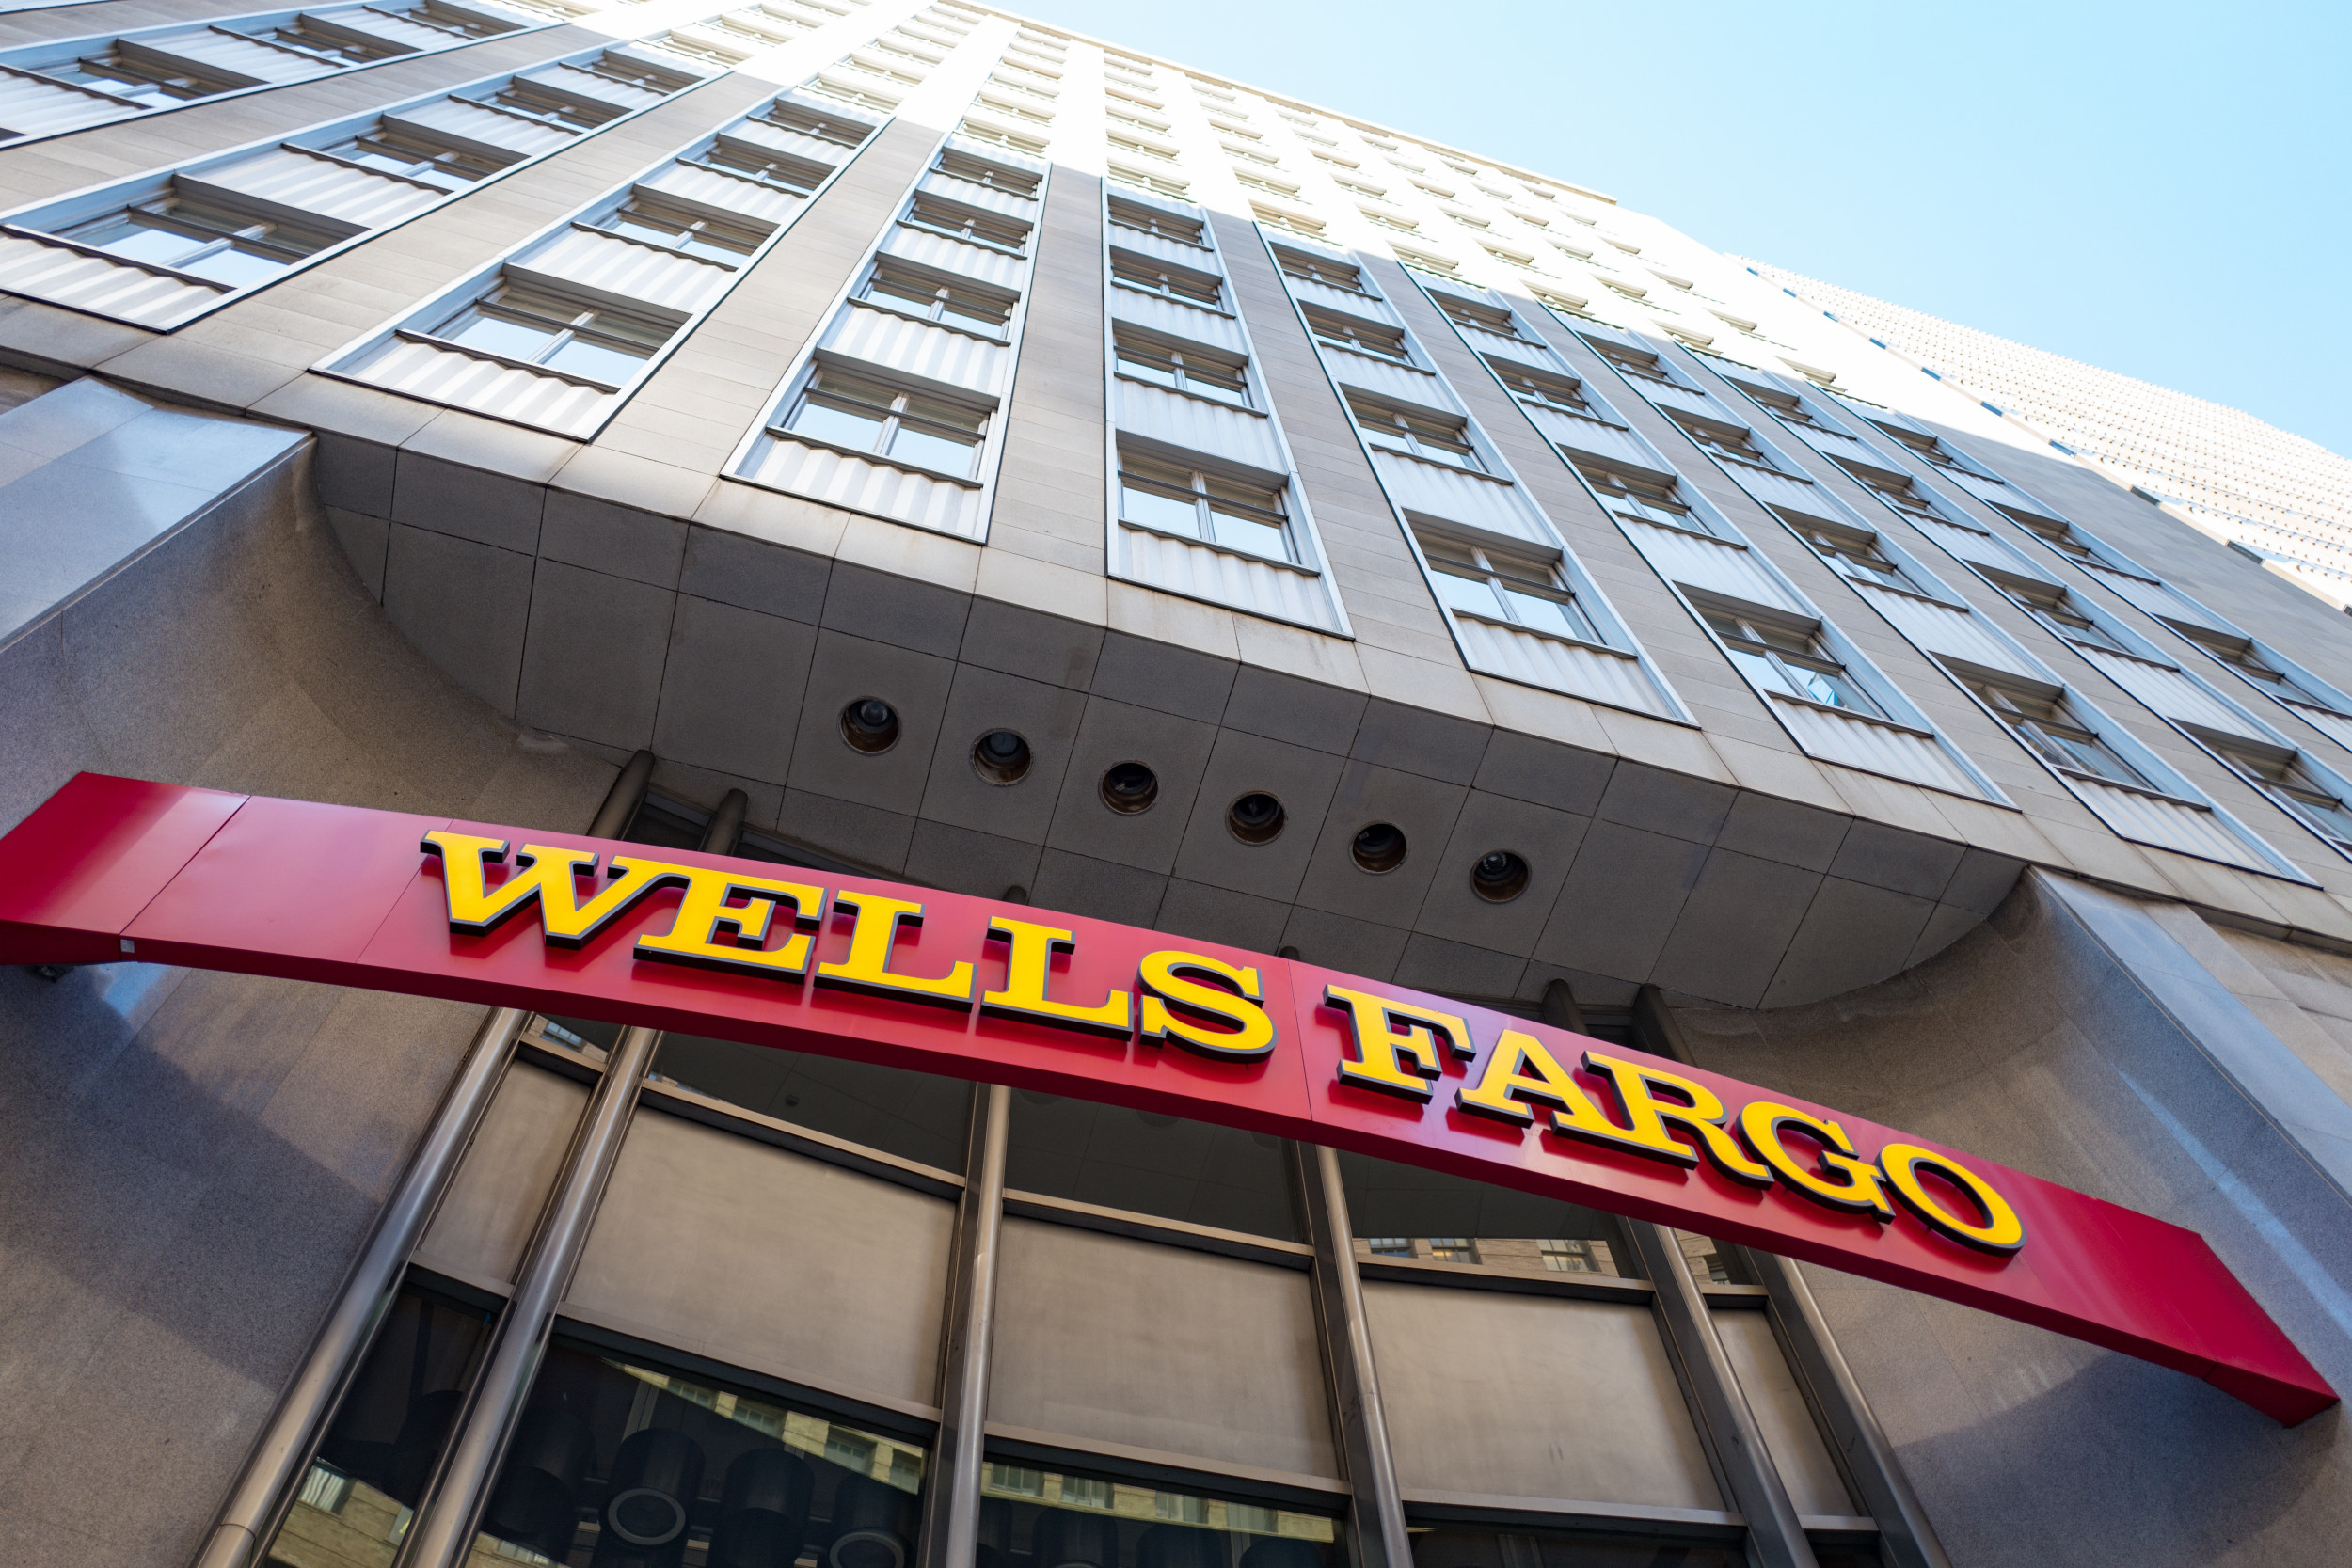 Are Banks Open on Christmas Day? Bank of America, Chase and Wells Fargo